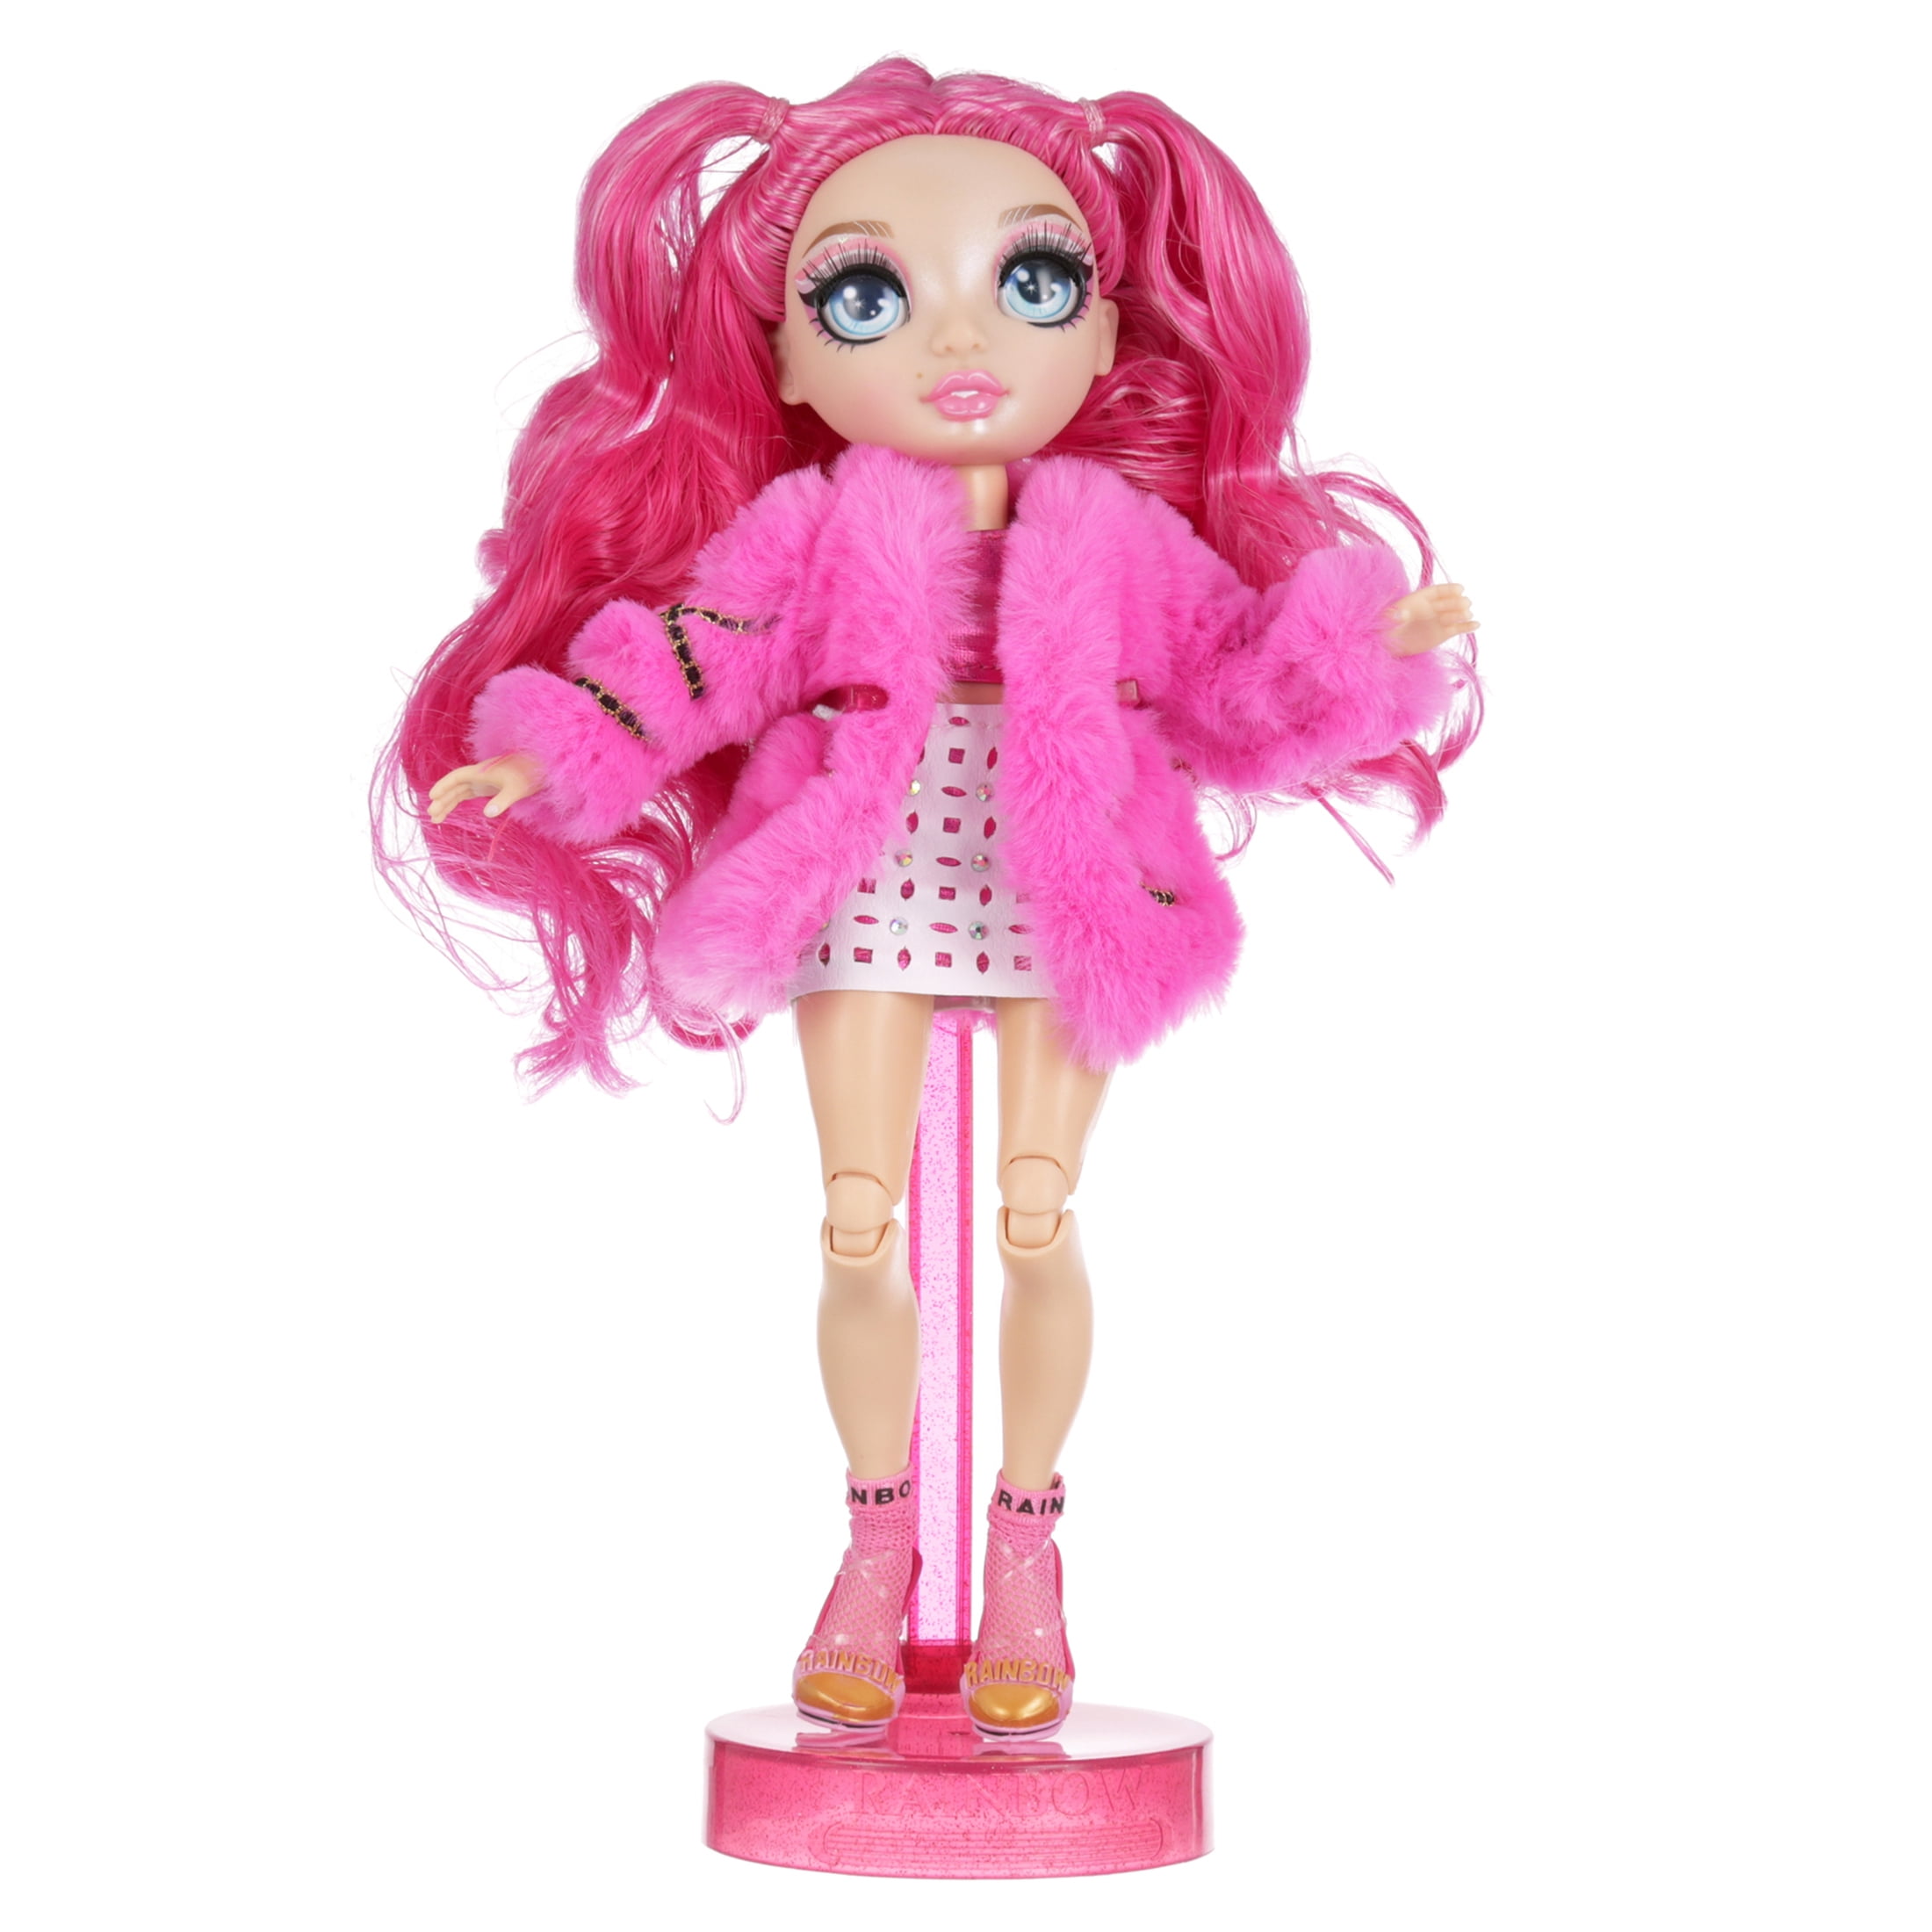 Fuchsia Great Gifts for Kids 6-12 Years Old Hot Pink Fashion Doll with 2 Doll Outfits to Mix & Match and Doll Accessories Rainbow High Stella Monroe 